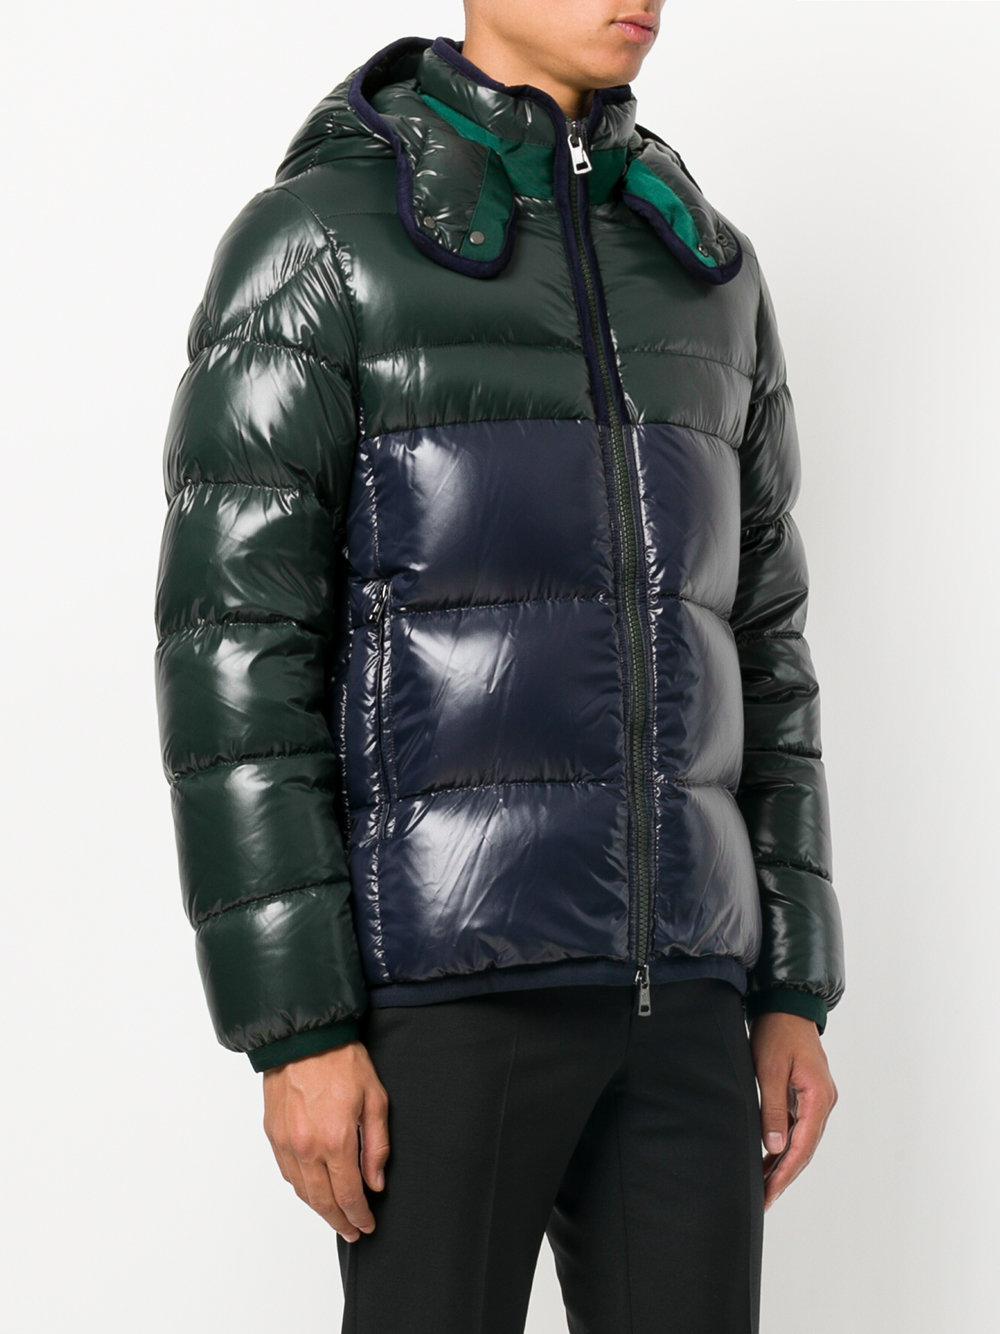 Lyst - Moncler Pascal Padded Jacket in Green for Men